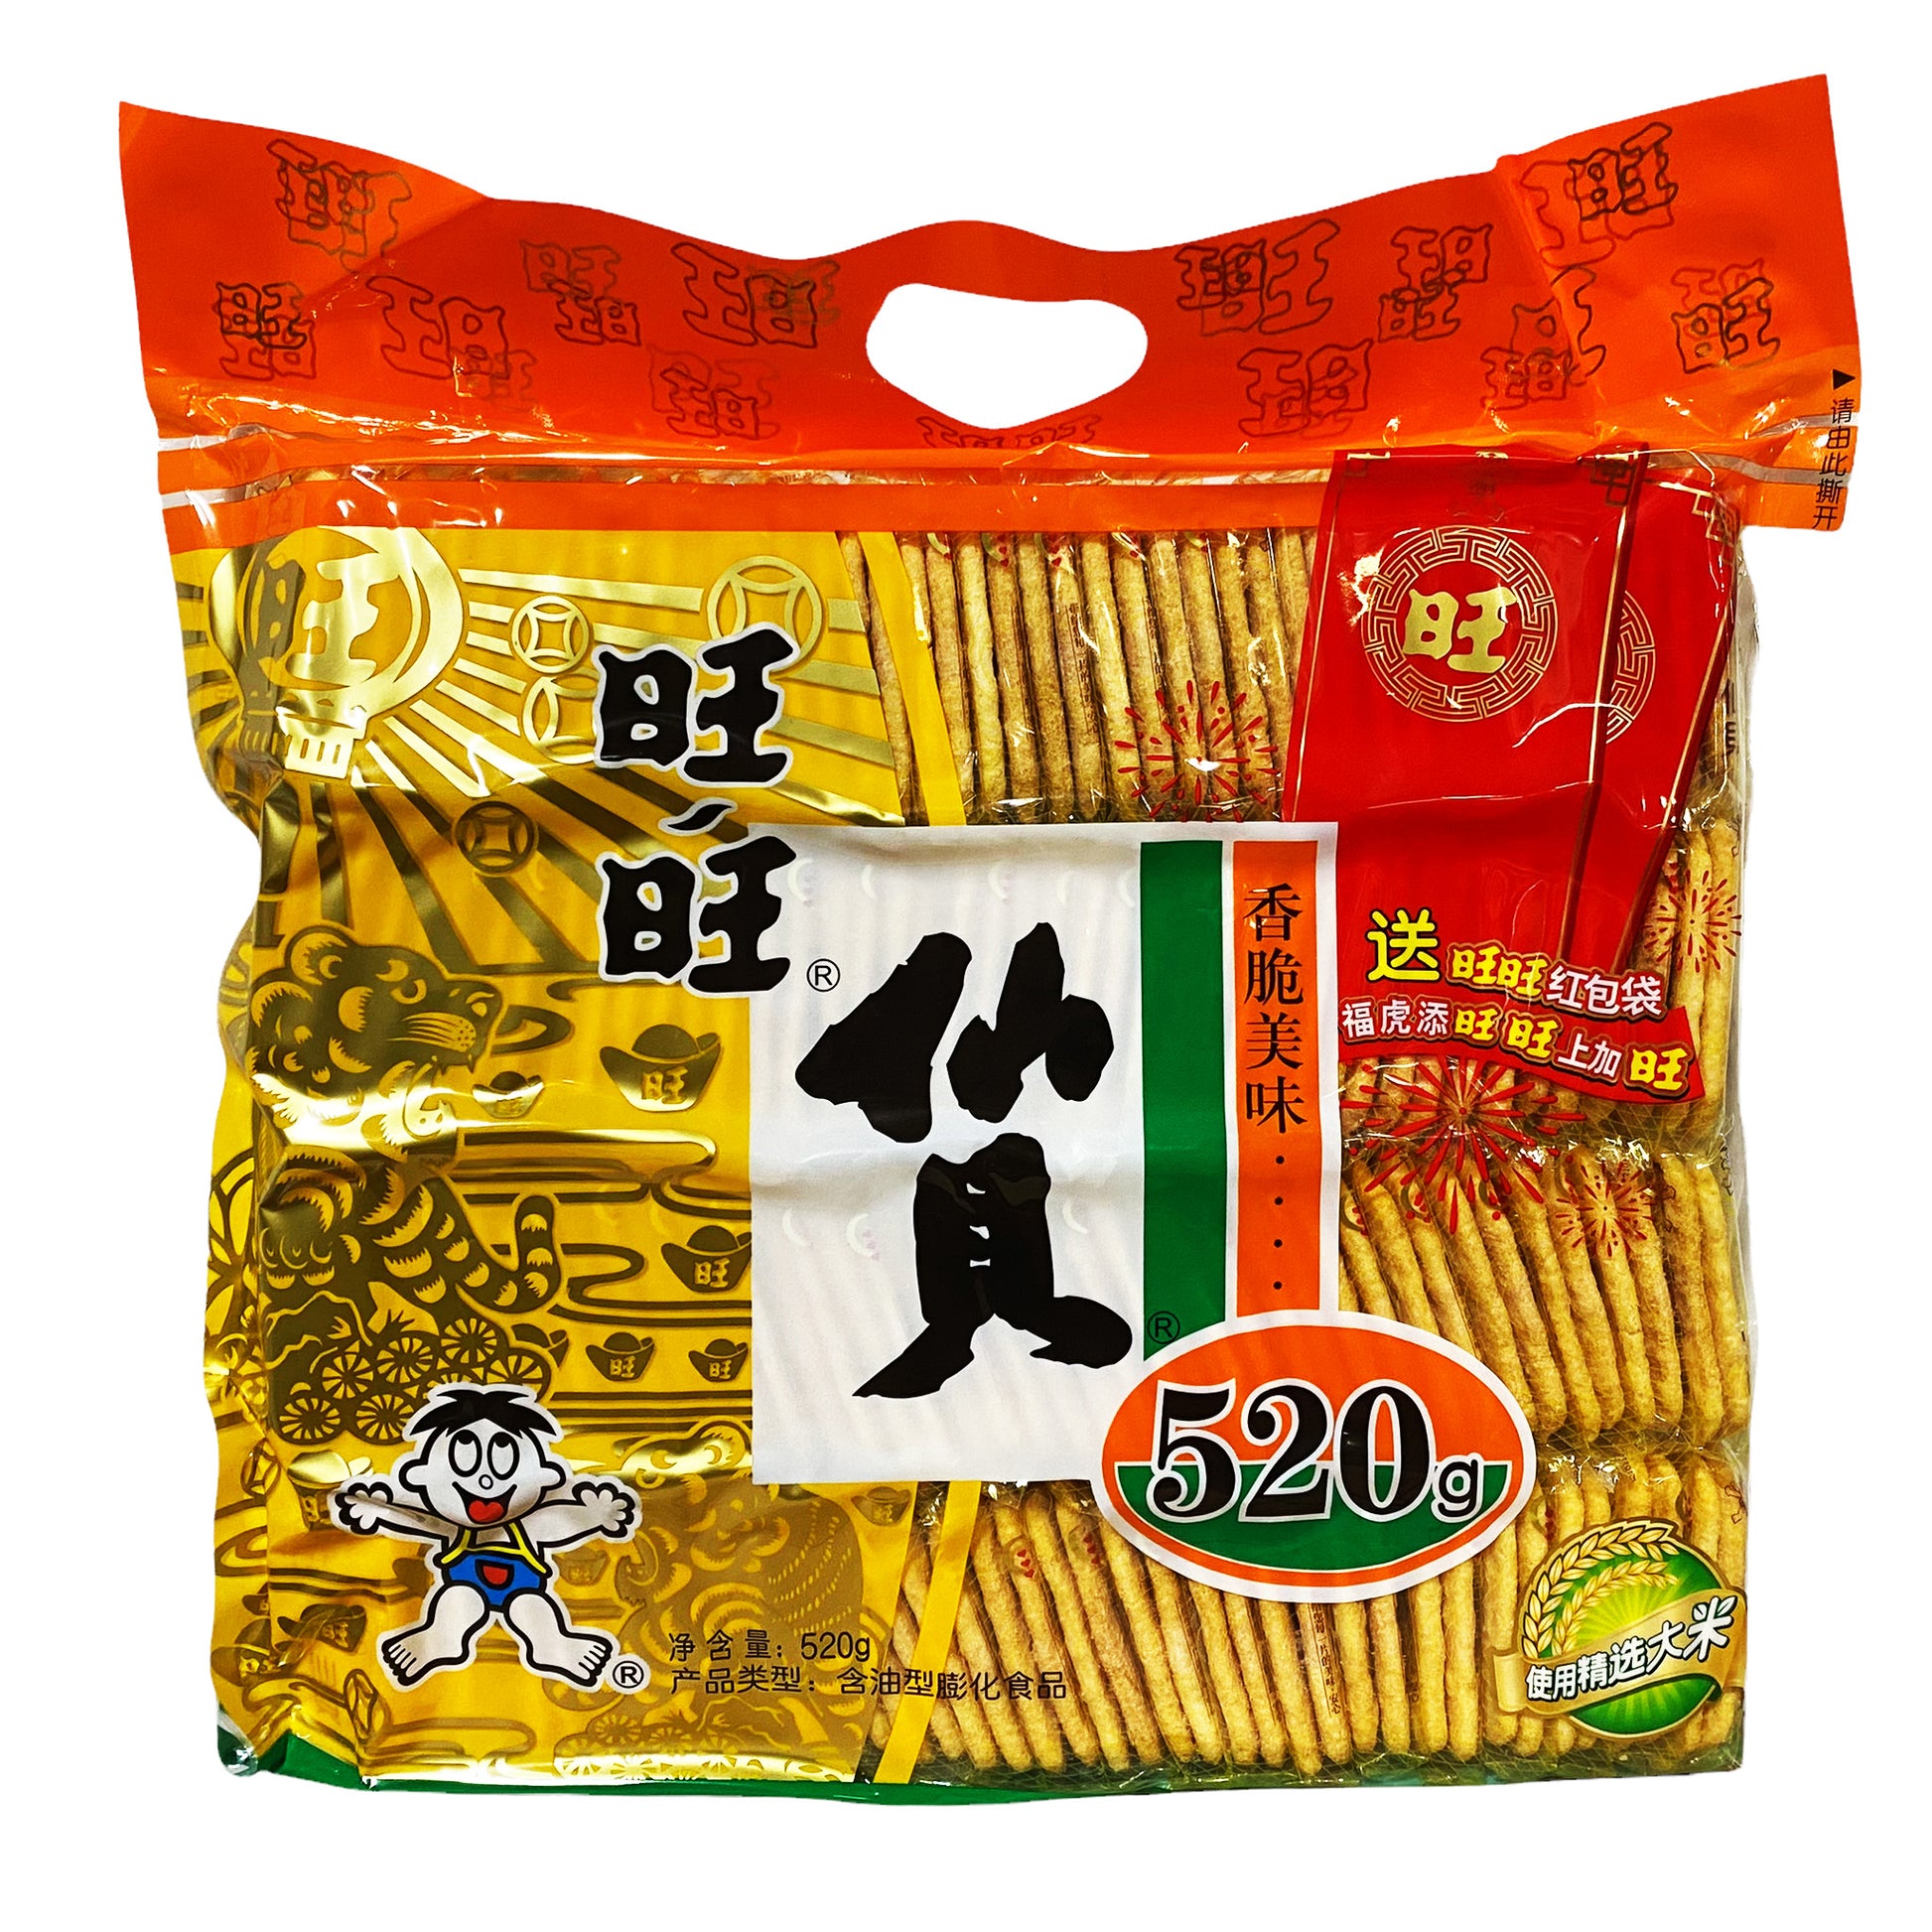 Front graphic image of Want Want Rice Crackers Senbei Family Pack 18.32oz - 旺旺 仙貝分享包 18.32oz